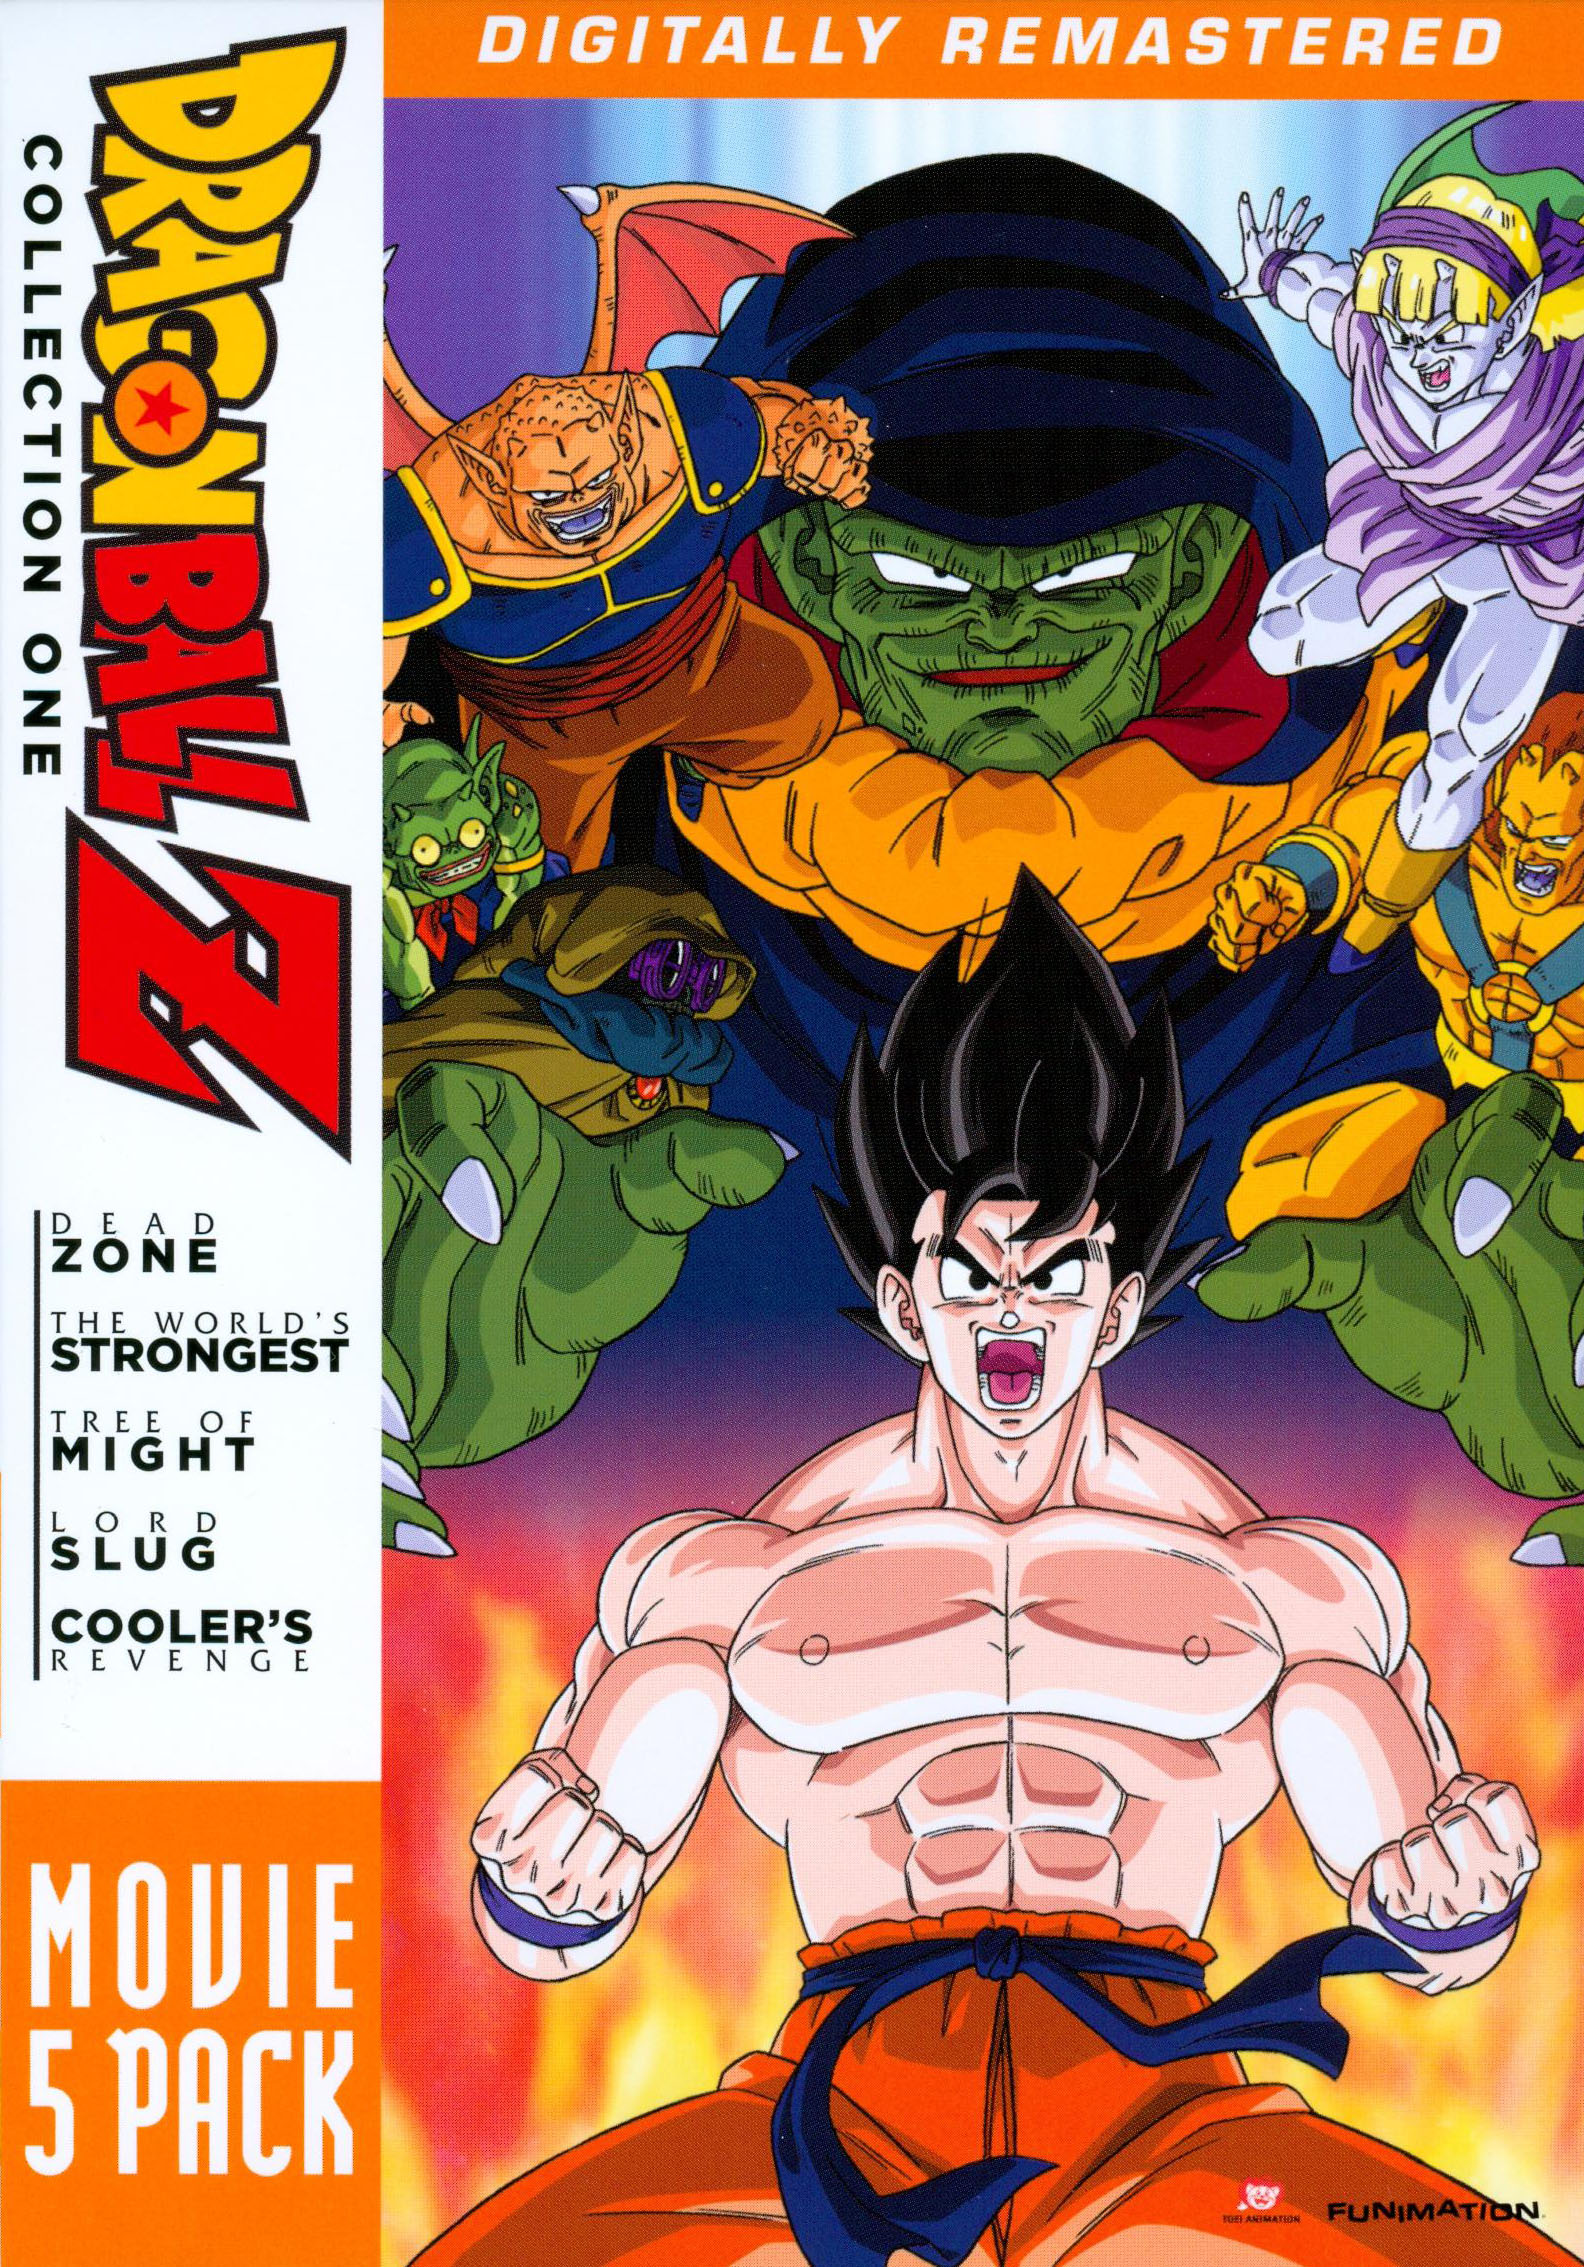 Dragon Ball: 4 Movie Pack [DVD] [Import] wgteh8f